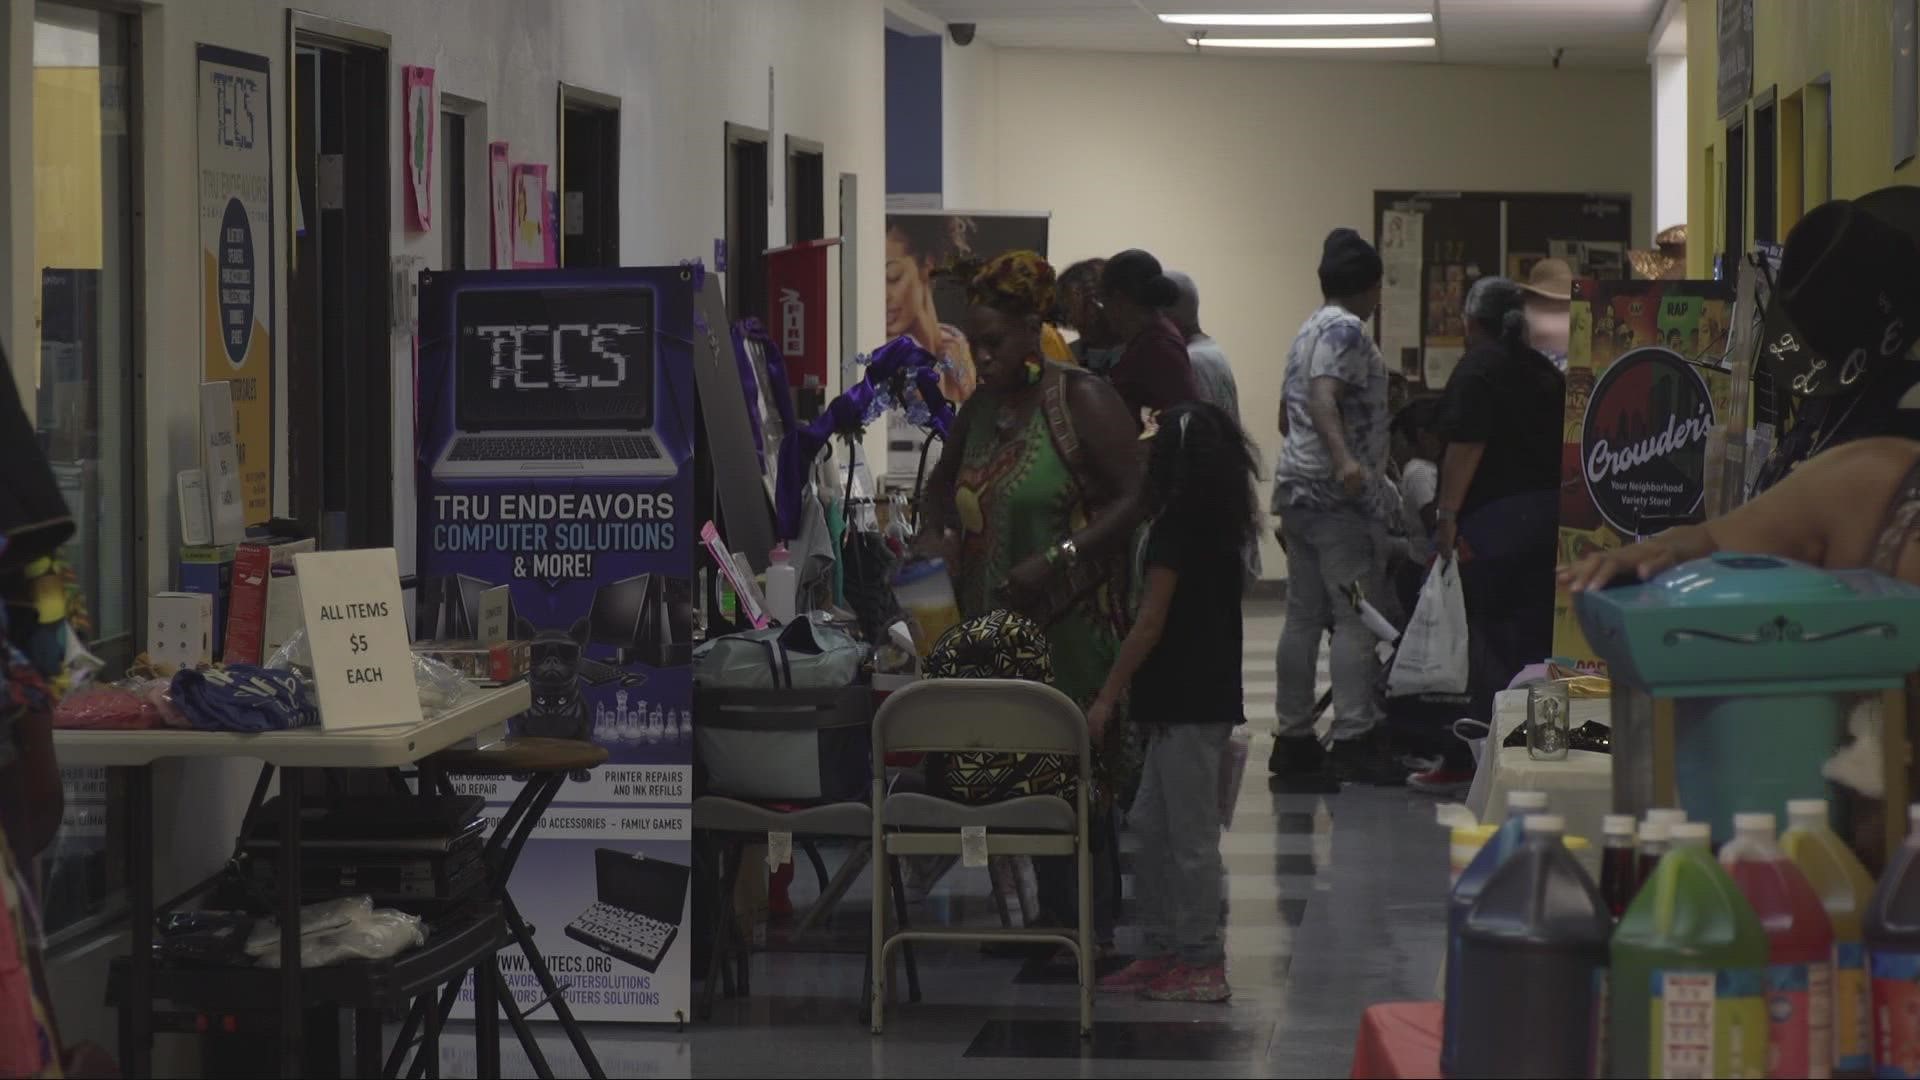 The "Youth Entrepreneurs Day" event included around 30 vendors with products ranging from clothing to baked goods.